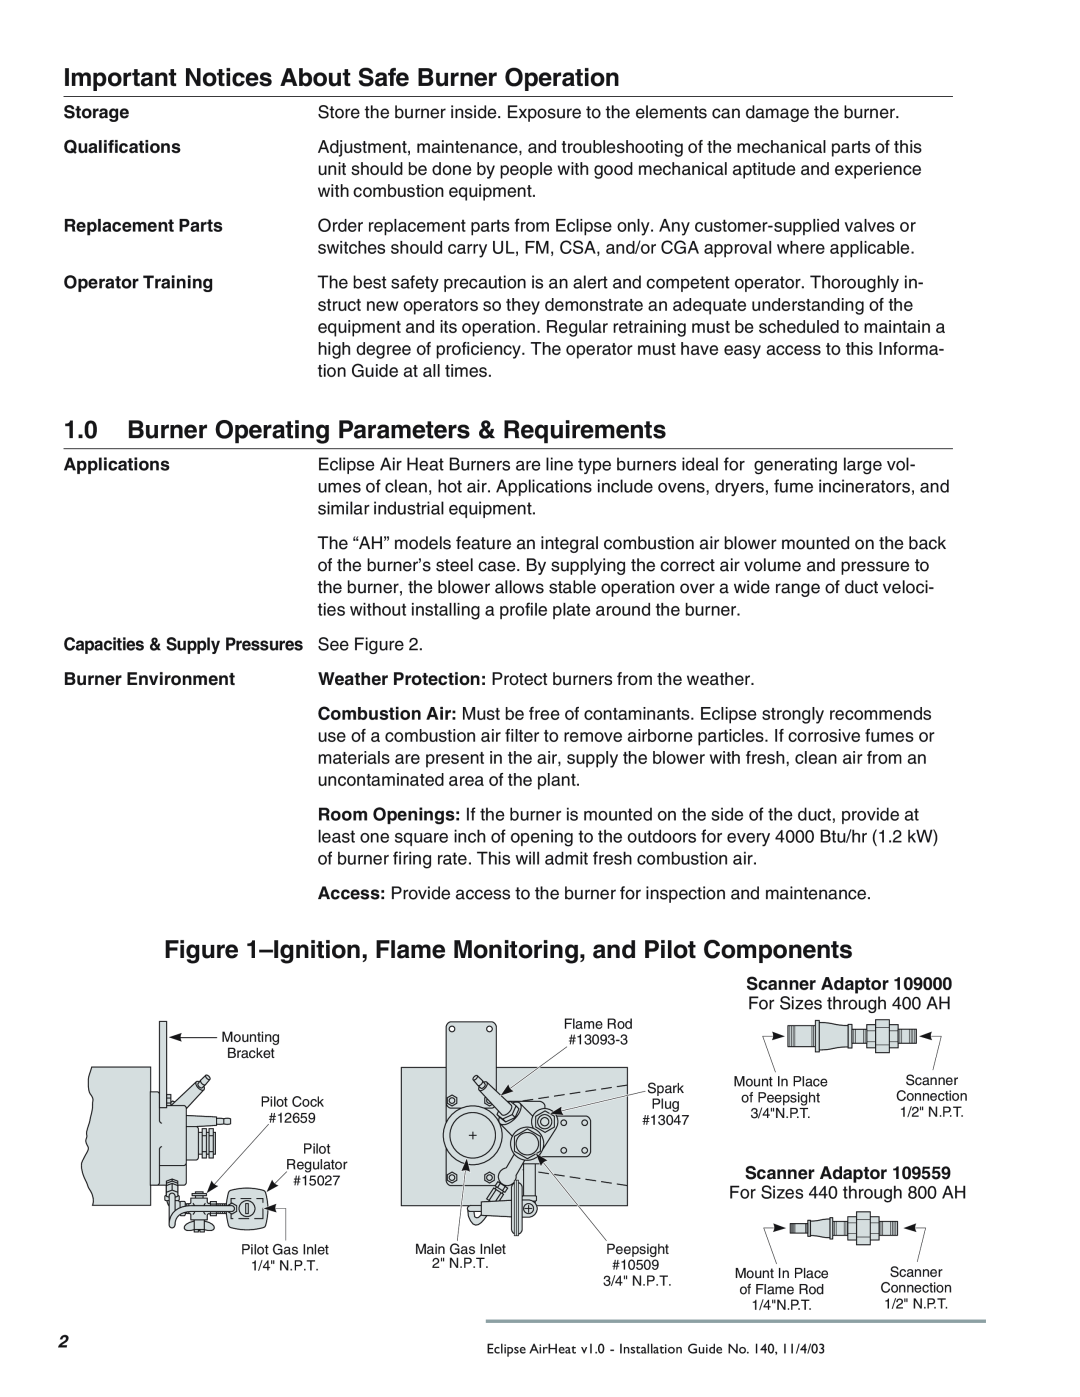 Eclipse Combustion TAH Important Notices About Safe Burner Operation, 1.0Burner Operating Parameters & Requirements 